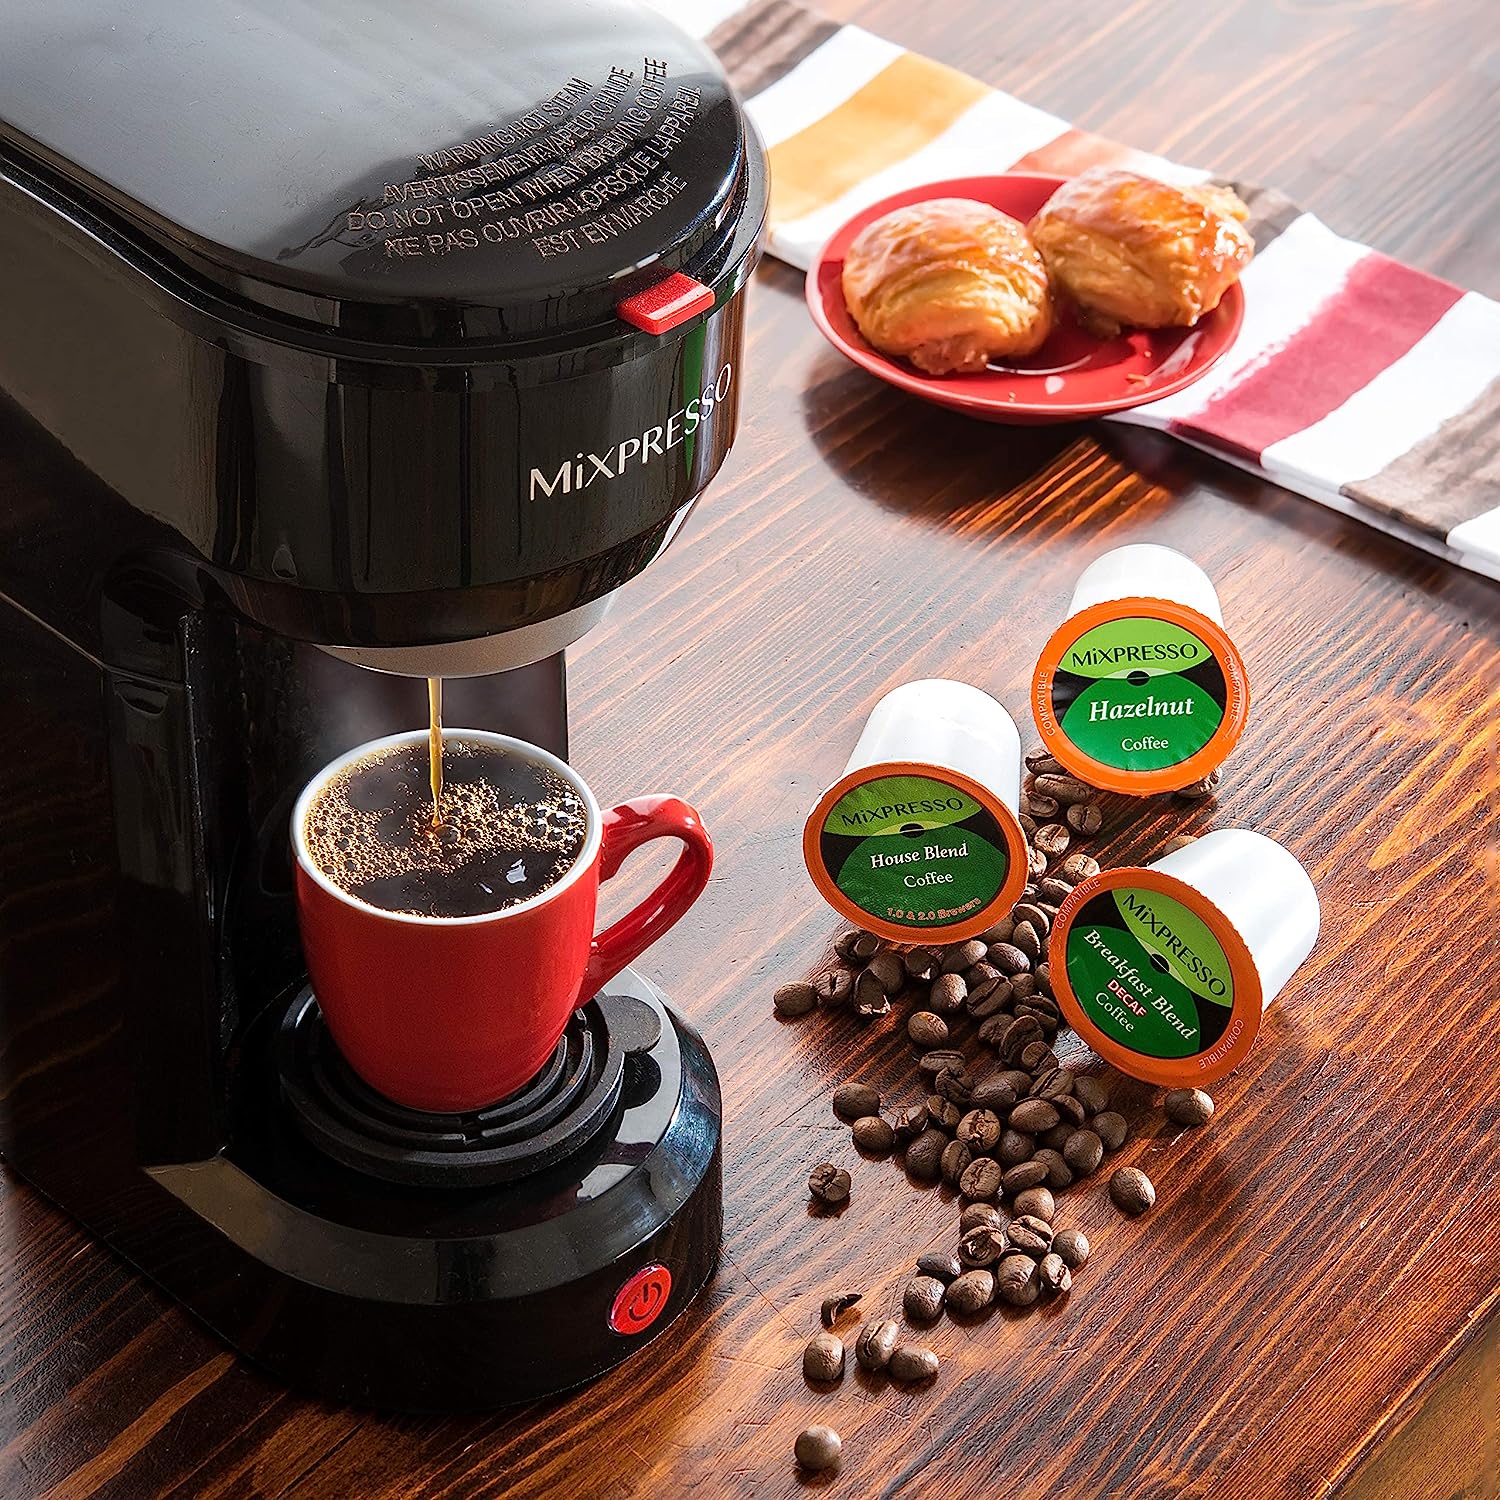 https://bigbigmart.com/wp-content/uploads/2023/07/Mixpresso-2-in-1-Coffee-Brewer-Single-Serve-and-K-Cup-Compatible-Ground-CoffeeCompact-Size-Mini-Coffee-Maker-Quick-Brew-Technology-14-oz-black6.jpg